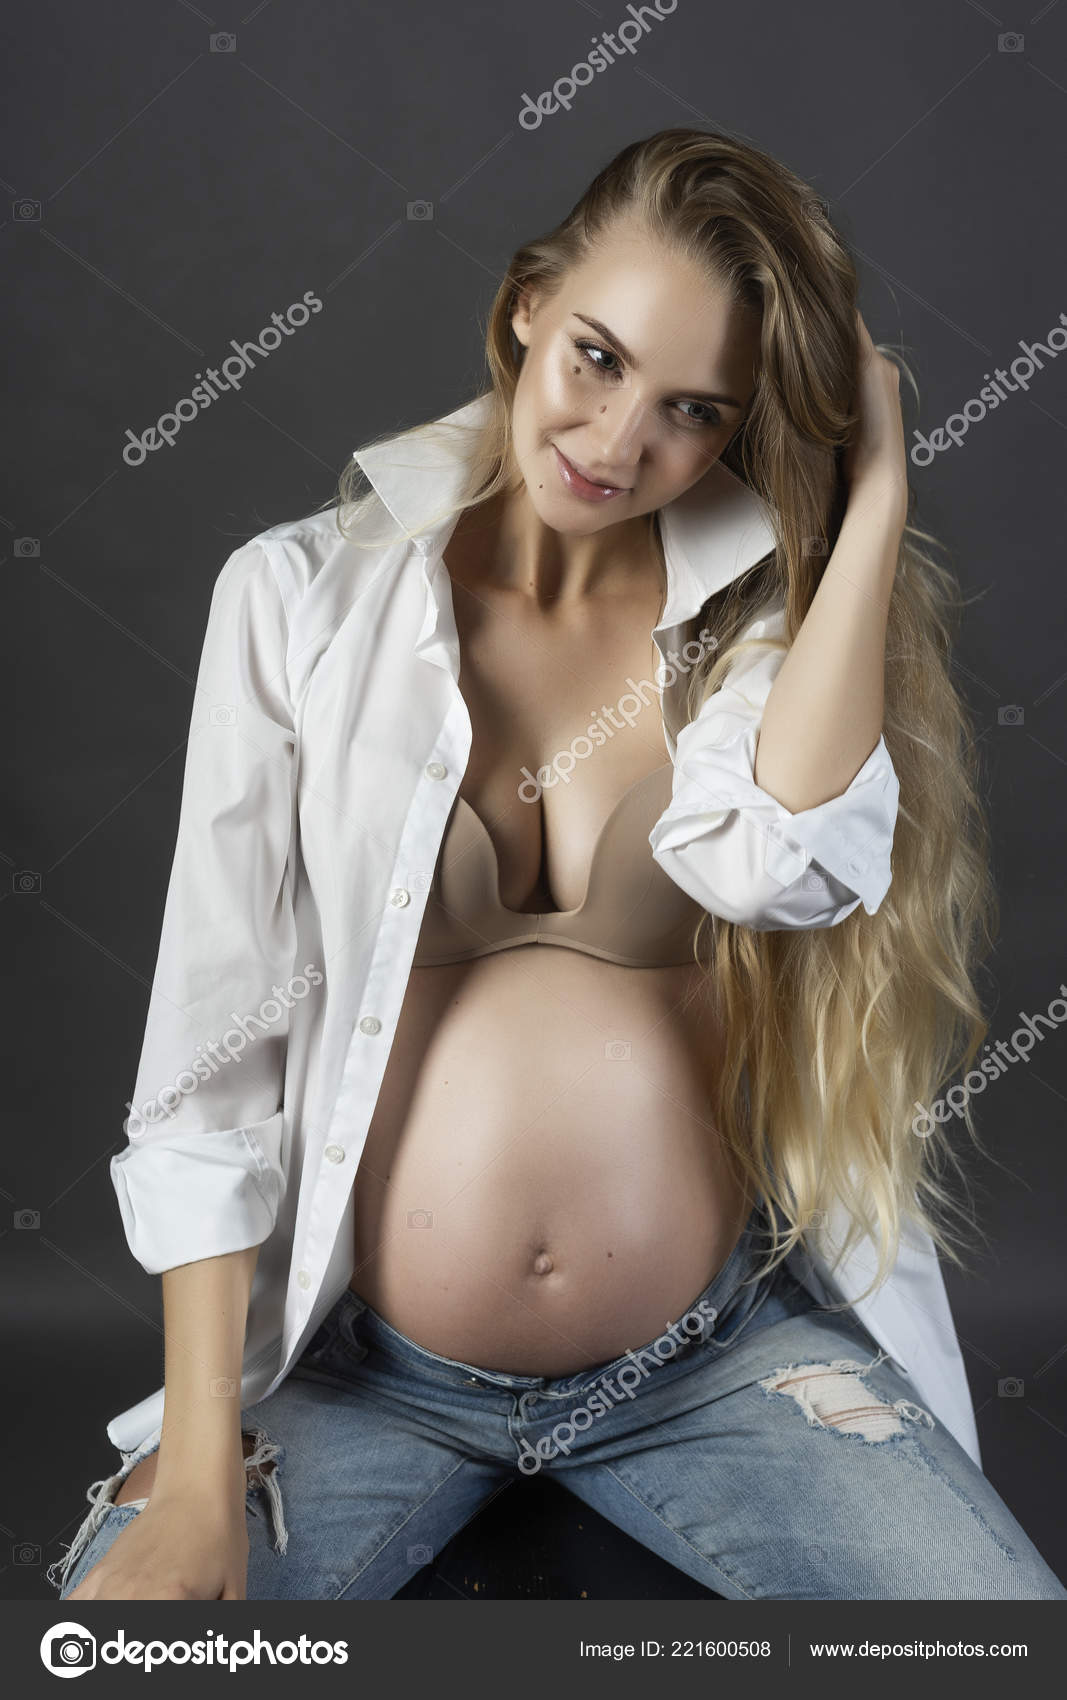 Long Hair Pregnant Nude - Beautiful Smiling Pregnant Young Blond Woman Wearing Ripped ...